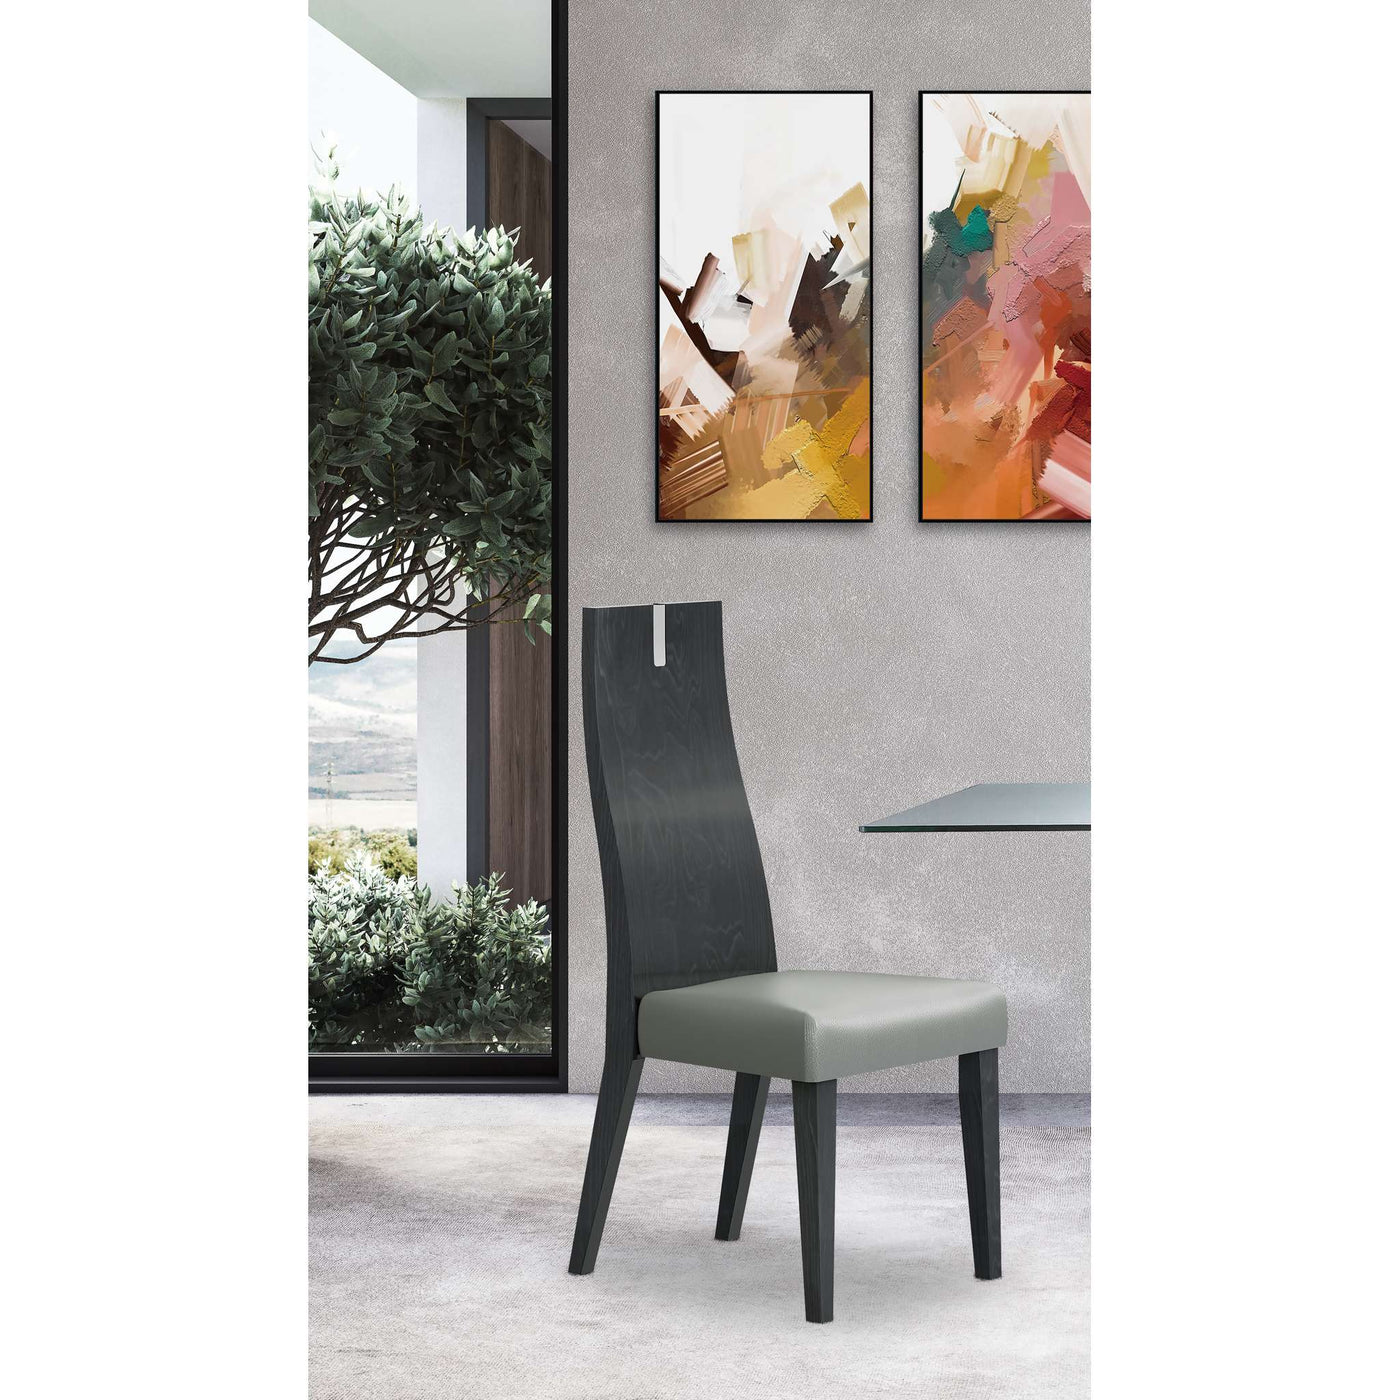 Los Dining Chair